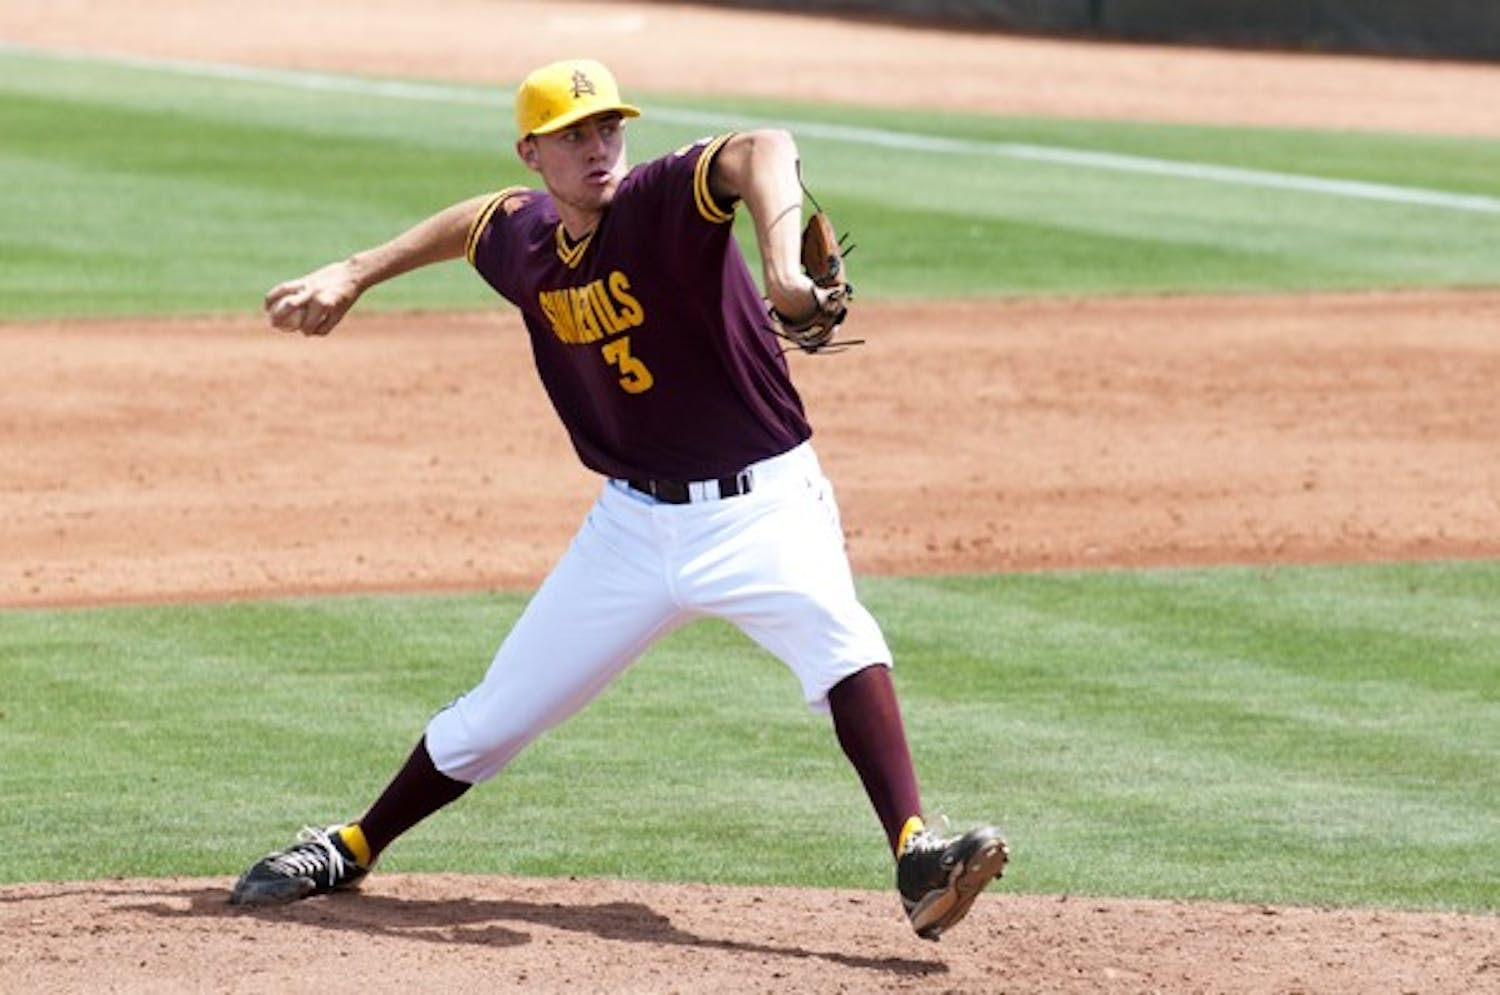 Bouncing Back: ASU sophomore Jake Barrett drives off the rubber during the Sun Devils’ 3-1 victory over Oregon on April 2. ASU, after getting swept by Oregon State, returns home looking to turn things around against UW. (Photo by Michael Arellano)